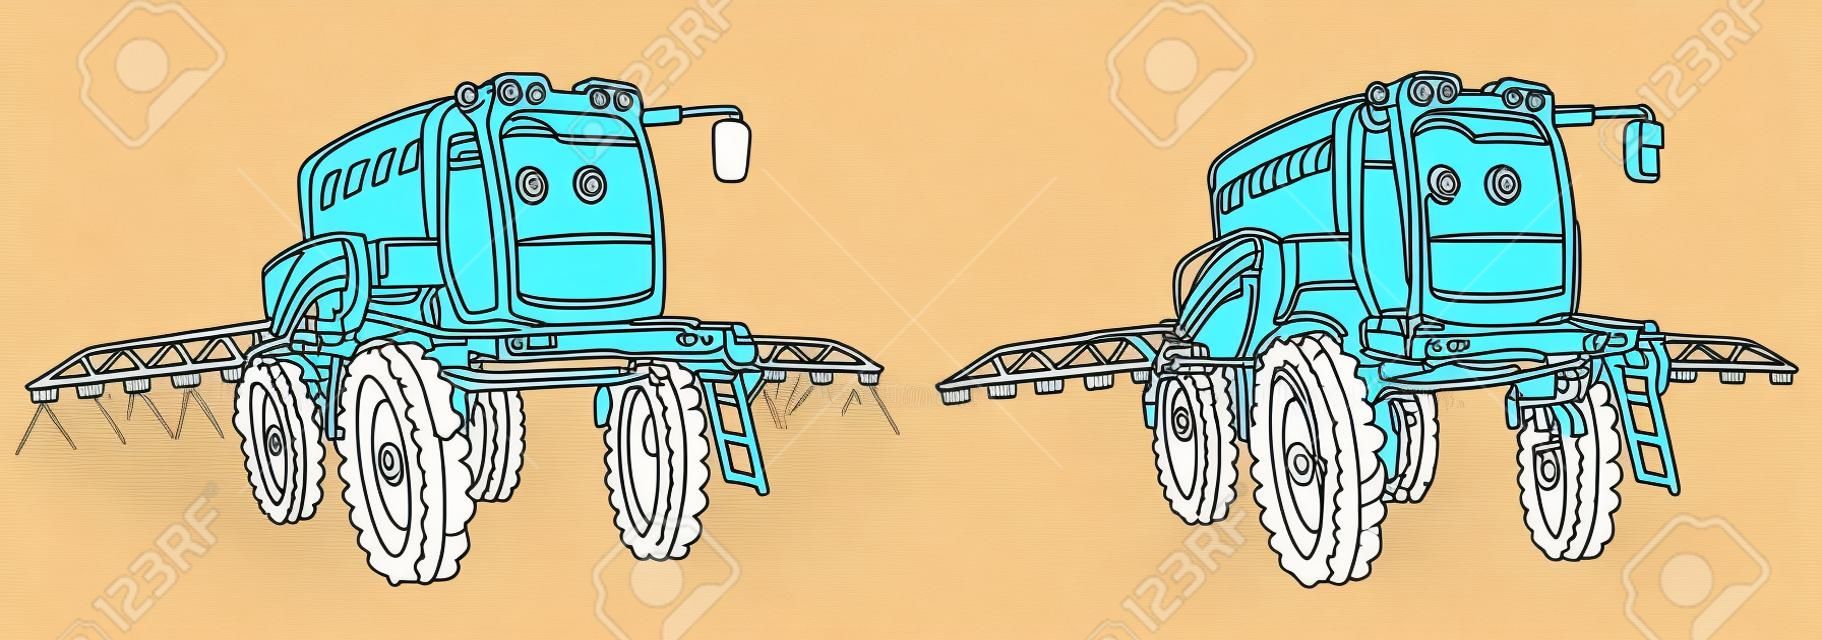 Coloring page with crop irrigation machine. Line art drawing for kids activity coloring book. Colorful clip art. Vector illustration.